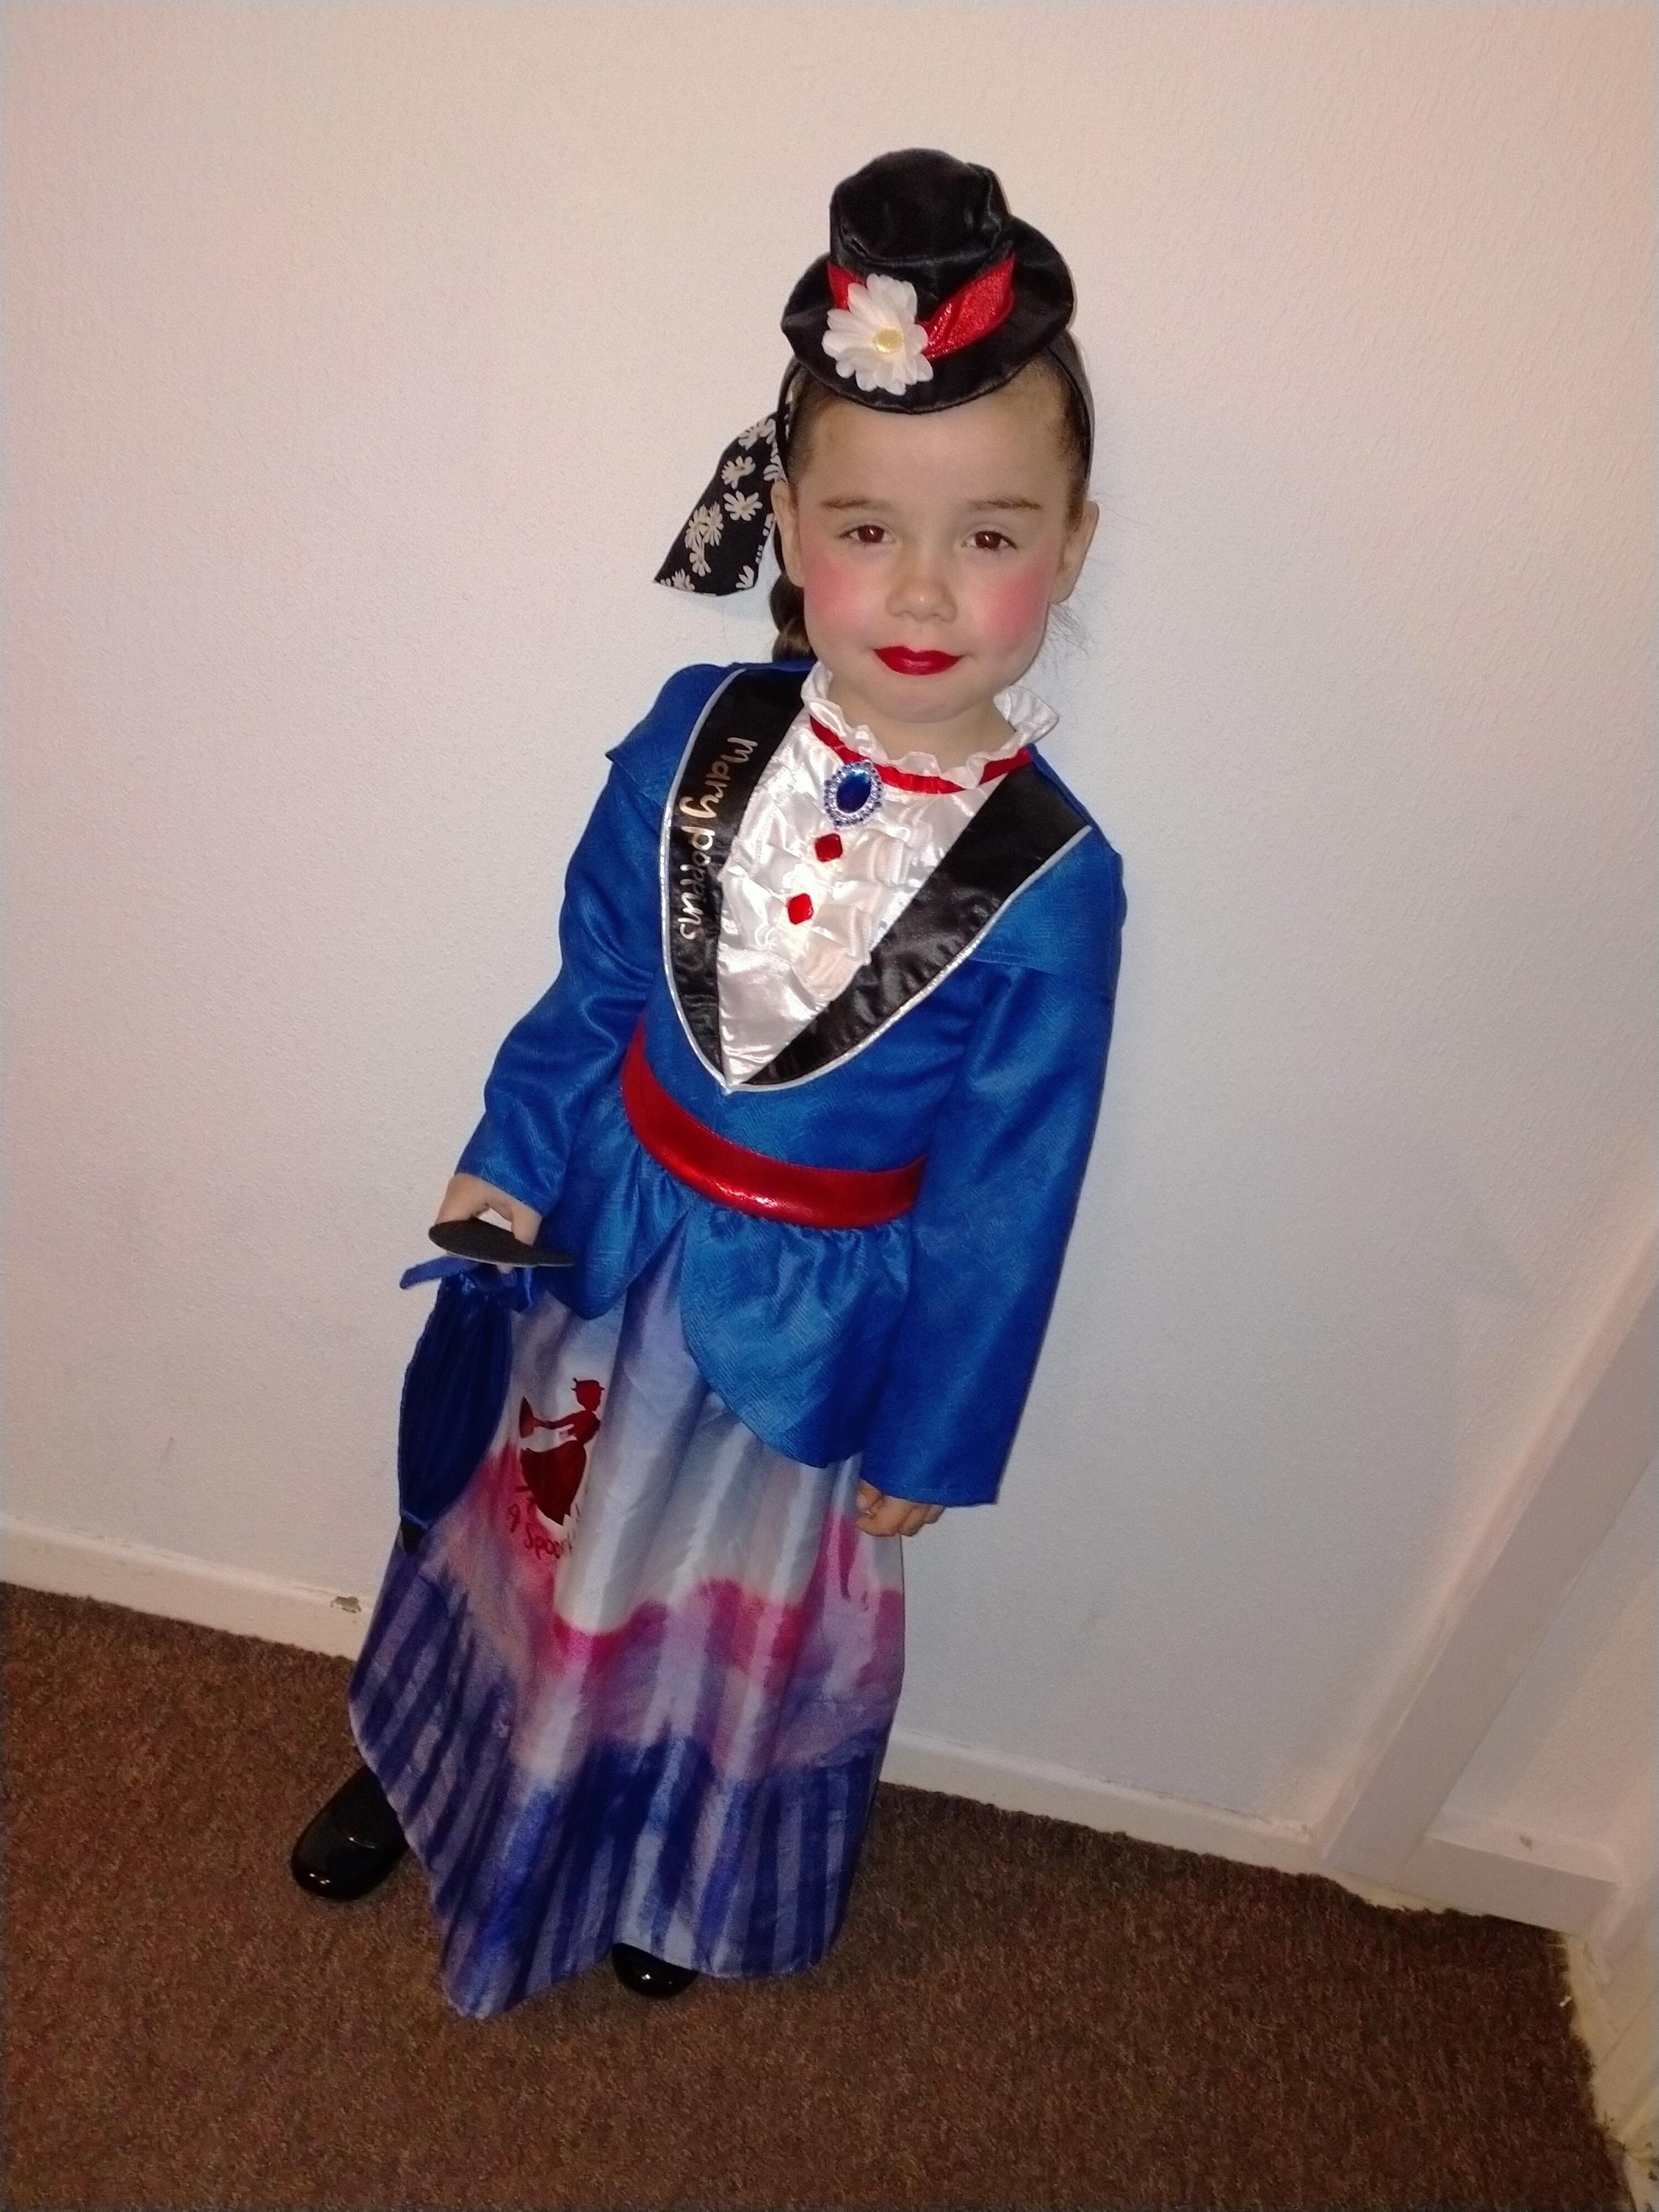 Lisa Roberts, from Acrefair: My daughter Elsie as Mary Poppins, practically perfect in every way.